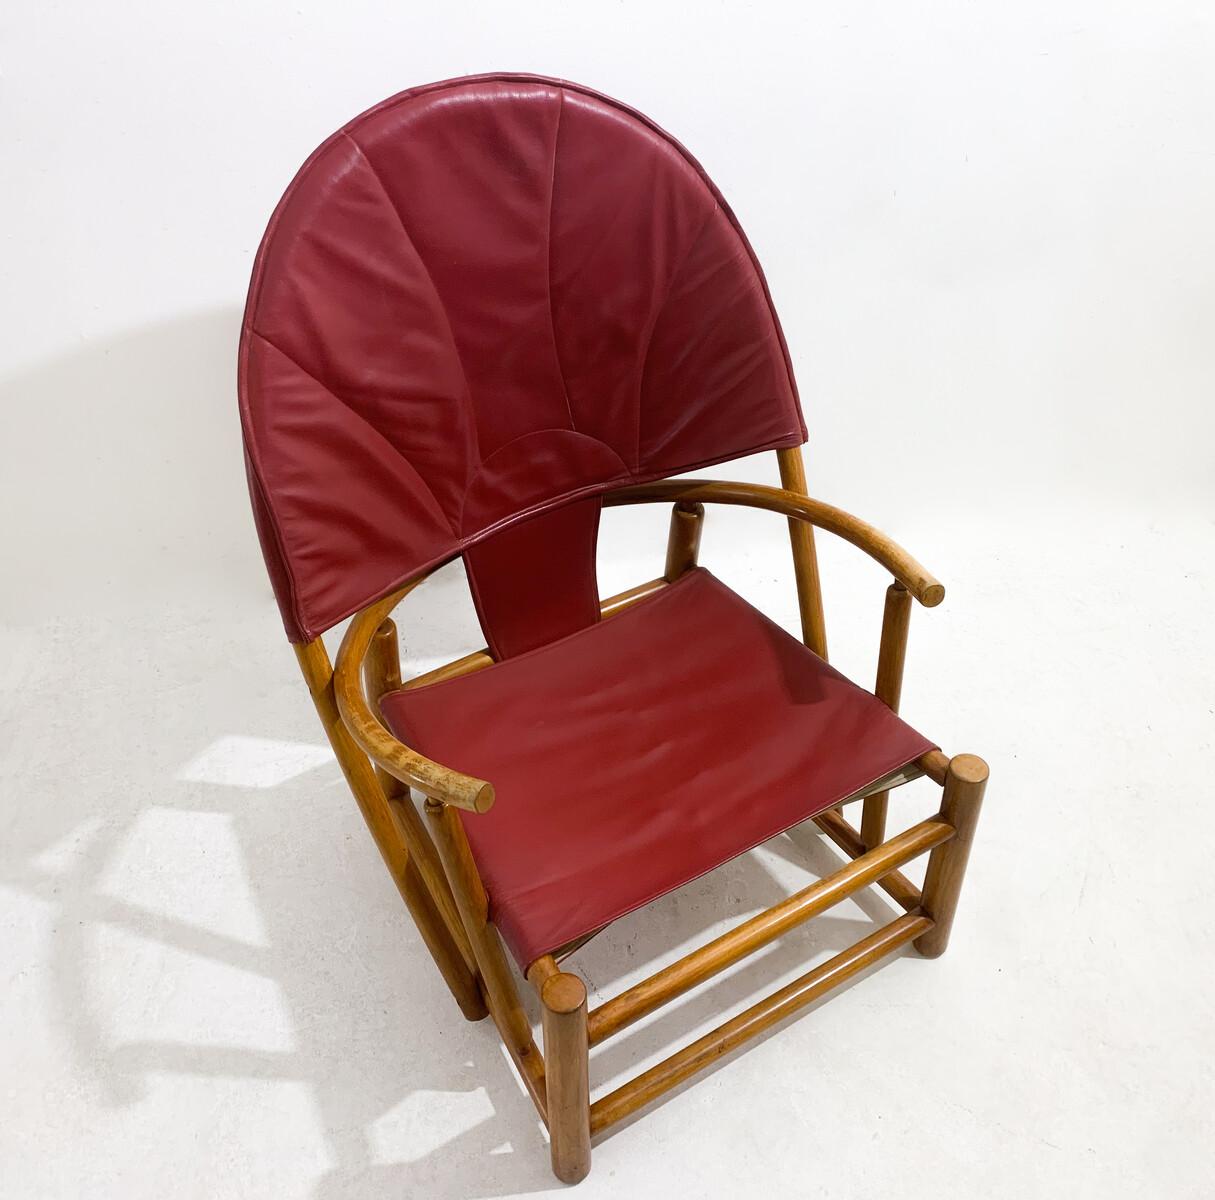 Late 20th Century Red G23 Hoop Armchair by Piero Palange & Werther Toffoloni, 1970s For Sale